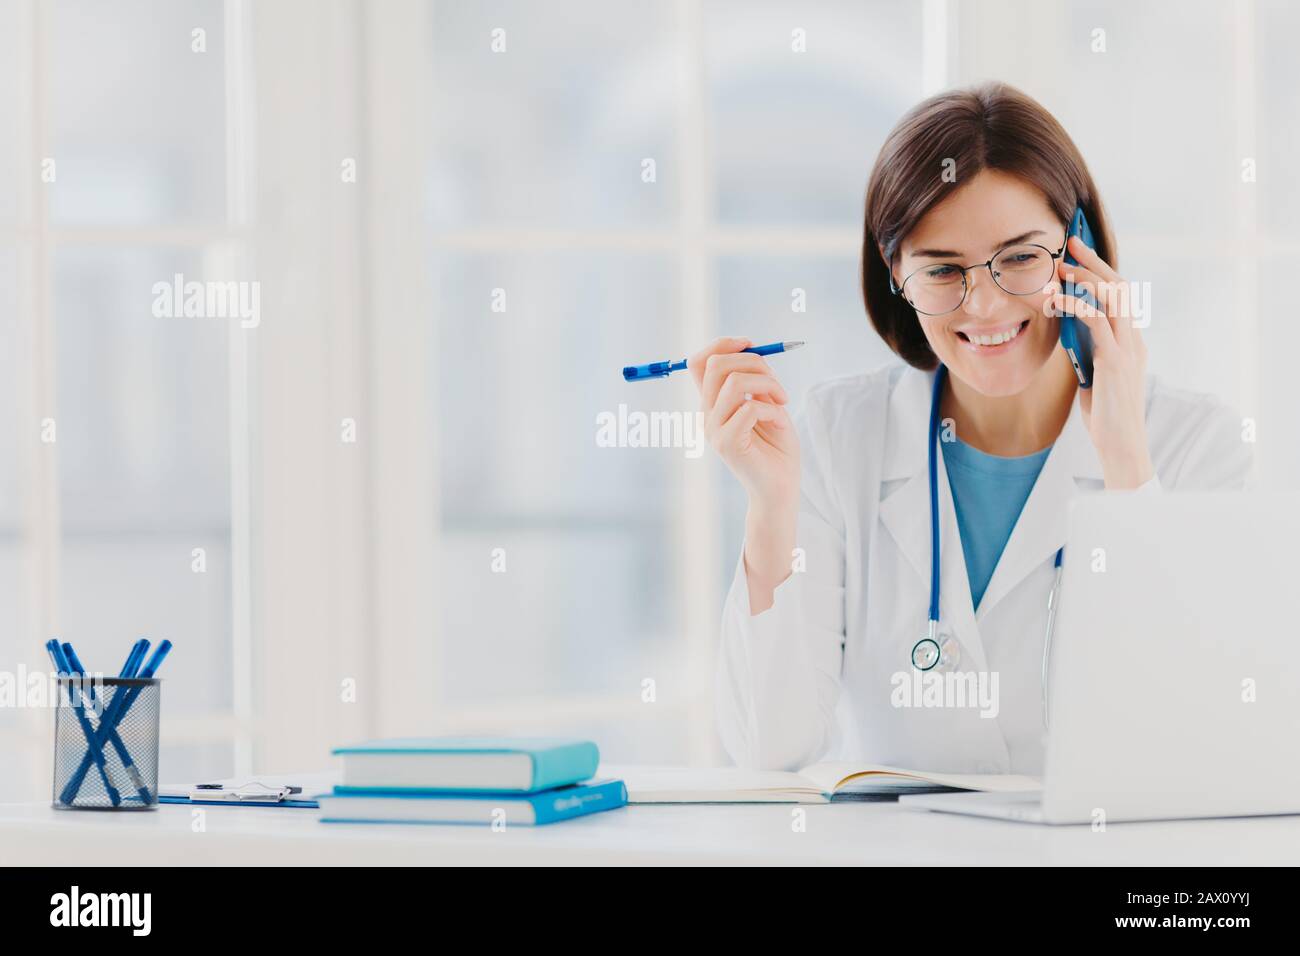 Glad professional doctor concentrated in modern laptop computer, reads useful information, has telephone conversation, discusses medical issues, sits Stock Photo